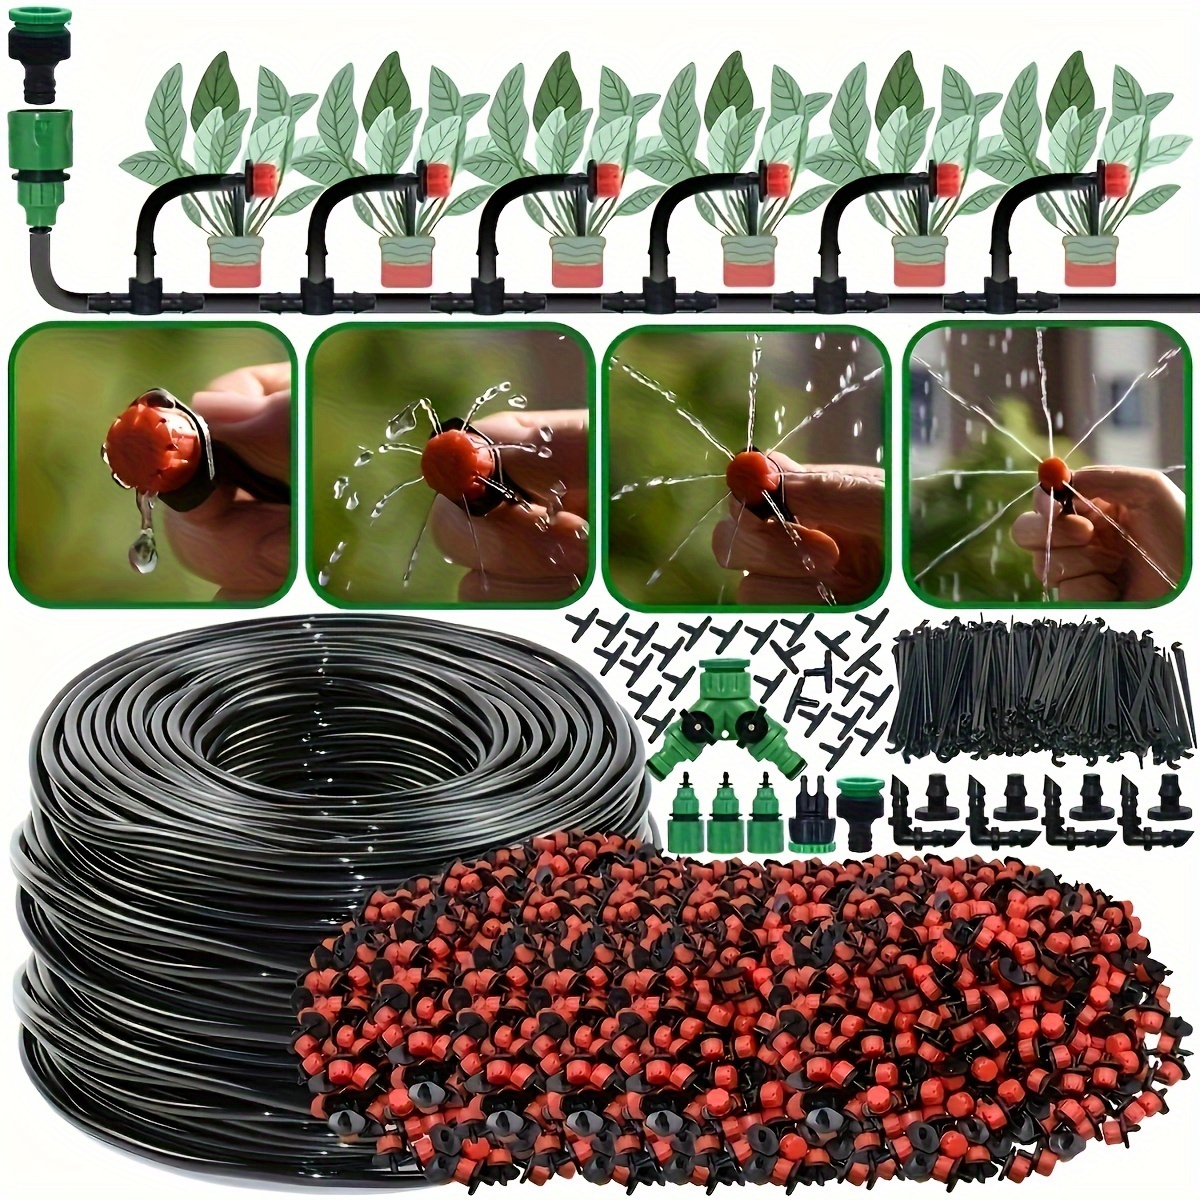 

Diy Micro Drip Irrigation Kit For Garden - 10m-30m, Automatic Watering System With Adjustable Drippers & 4/7'' Hose, Fit